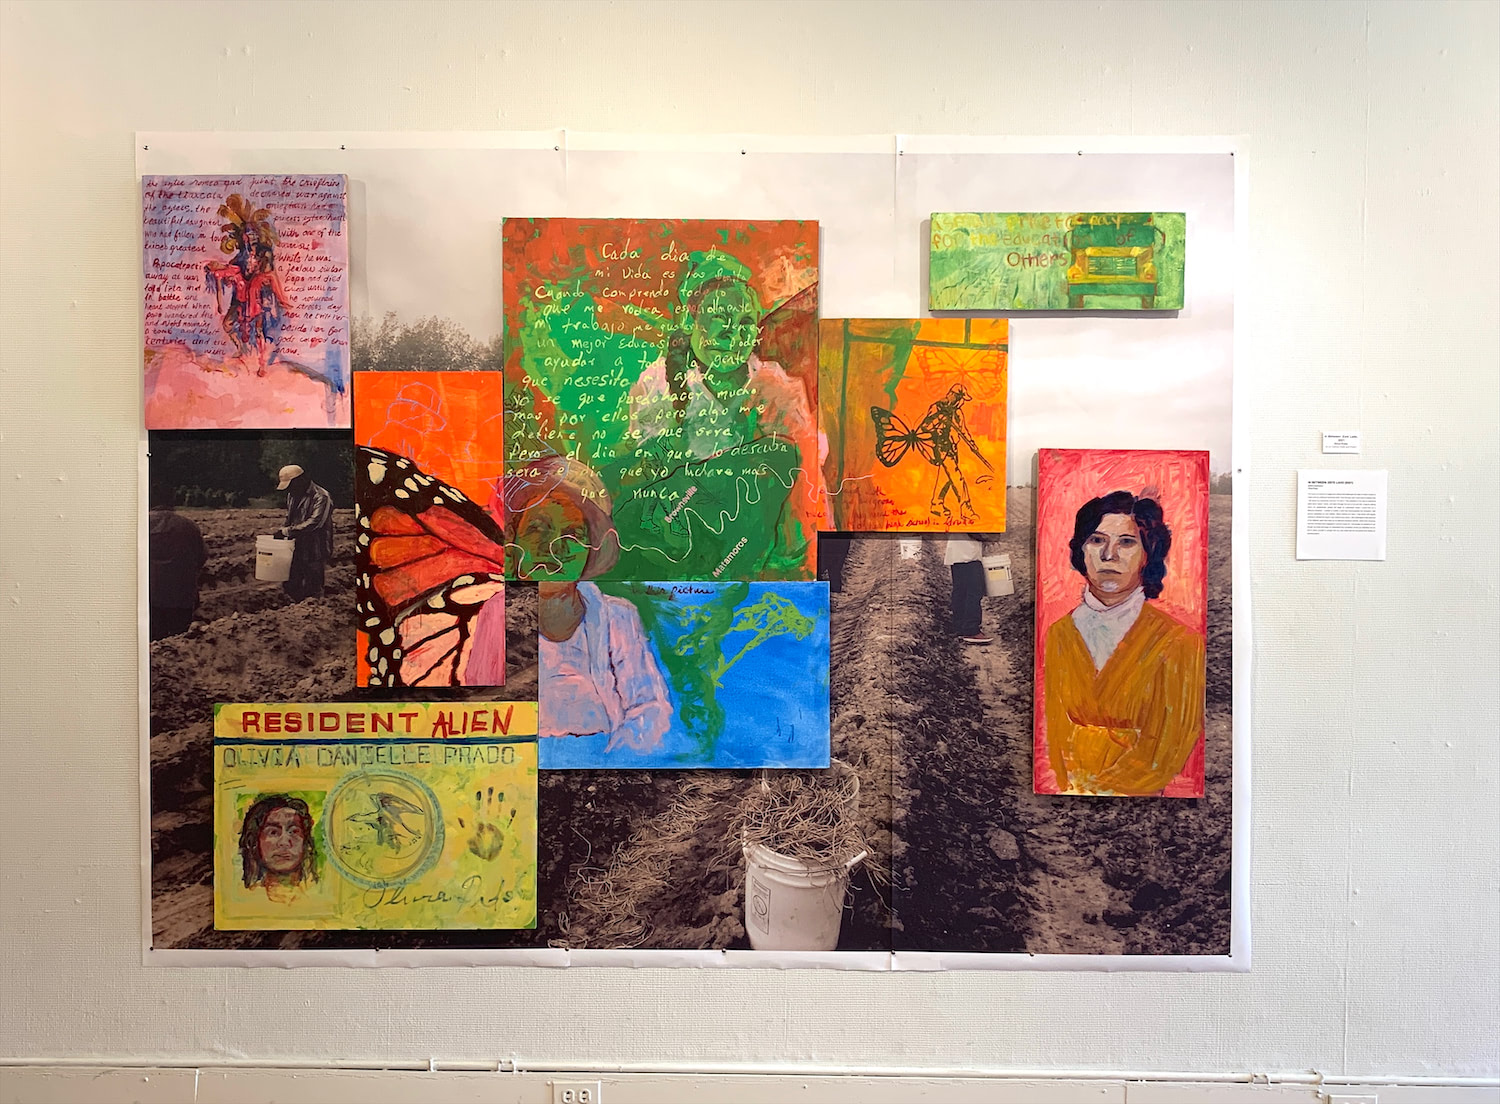 The image contains eight oil painted canvas panels hung over a printed image of field workers. From left to right in the upper row, the first panel contains the figures and story of Popo and Itza, next is a butterfly wing and line drawing of a worker, then a writing in Spanish and two portraits of workers, next a worker and multiple butterflies, finally on the top right in a school bus and quote about education. In the lower row of panels, first is a permanent resident card with a portrait and alternate writing, next is a figure continued from another panel and a figure of a worker, finally there is a portrait of a woman.